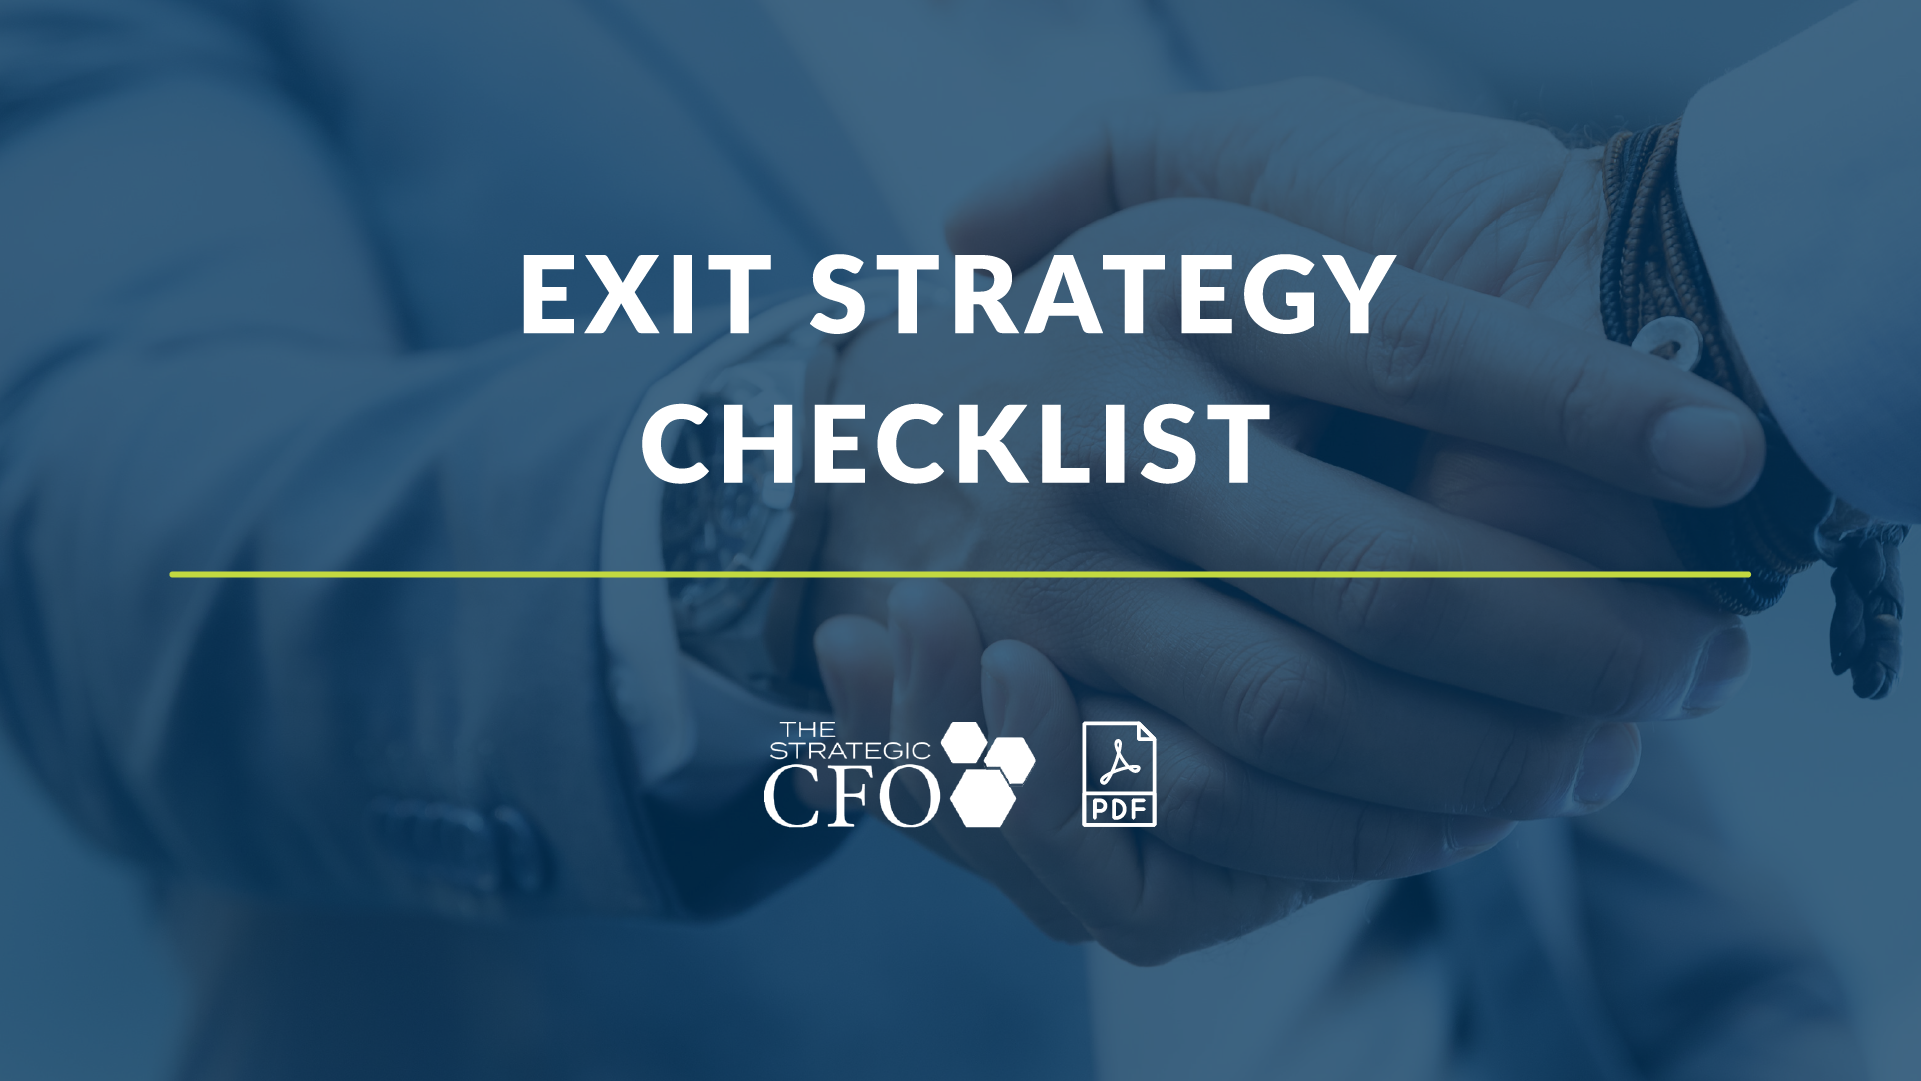 Business exit strategy checklist document cover.